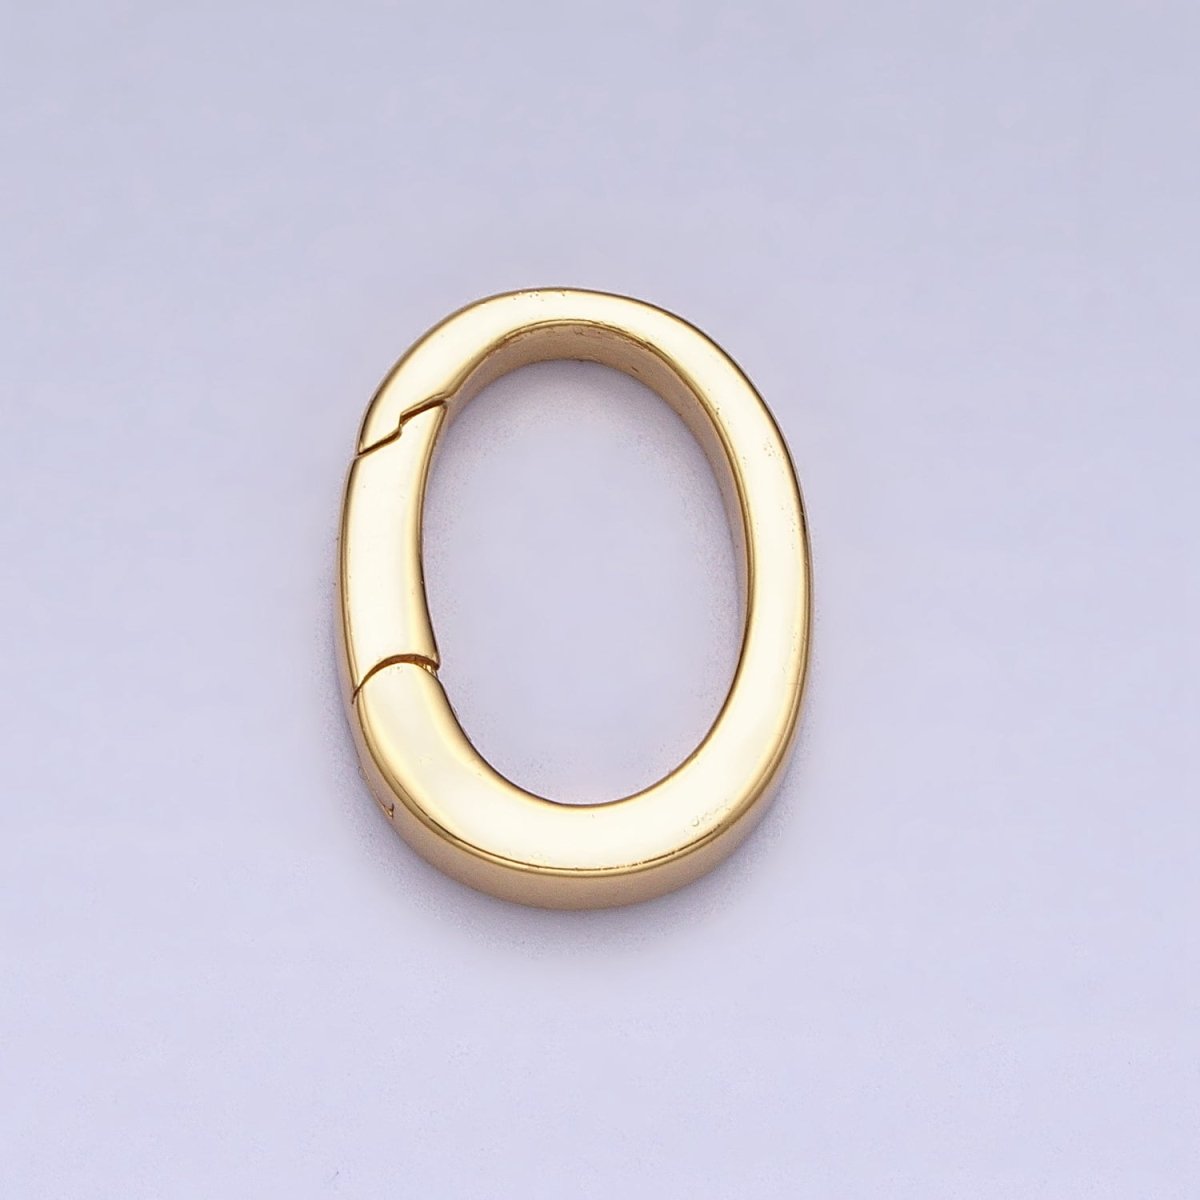 Mini Gold Spring Gate Ring, Push Gate ring 13.4 x 17.5mm Oval Ring Charm Holder Gold Clasp for Jewelry Clasp Z-305 Z-306 - DLUXCA